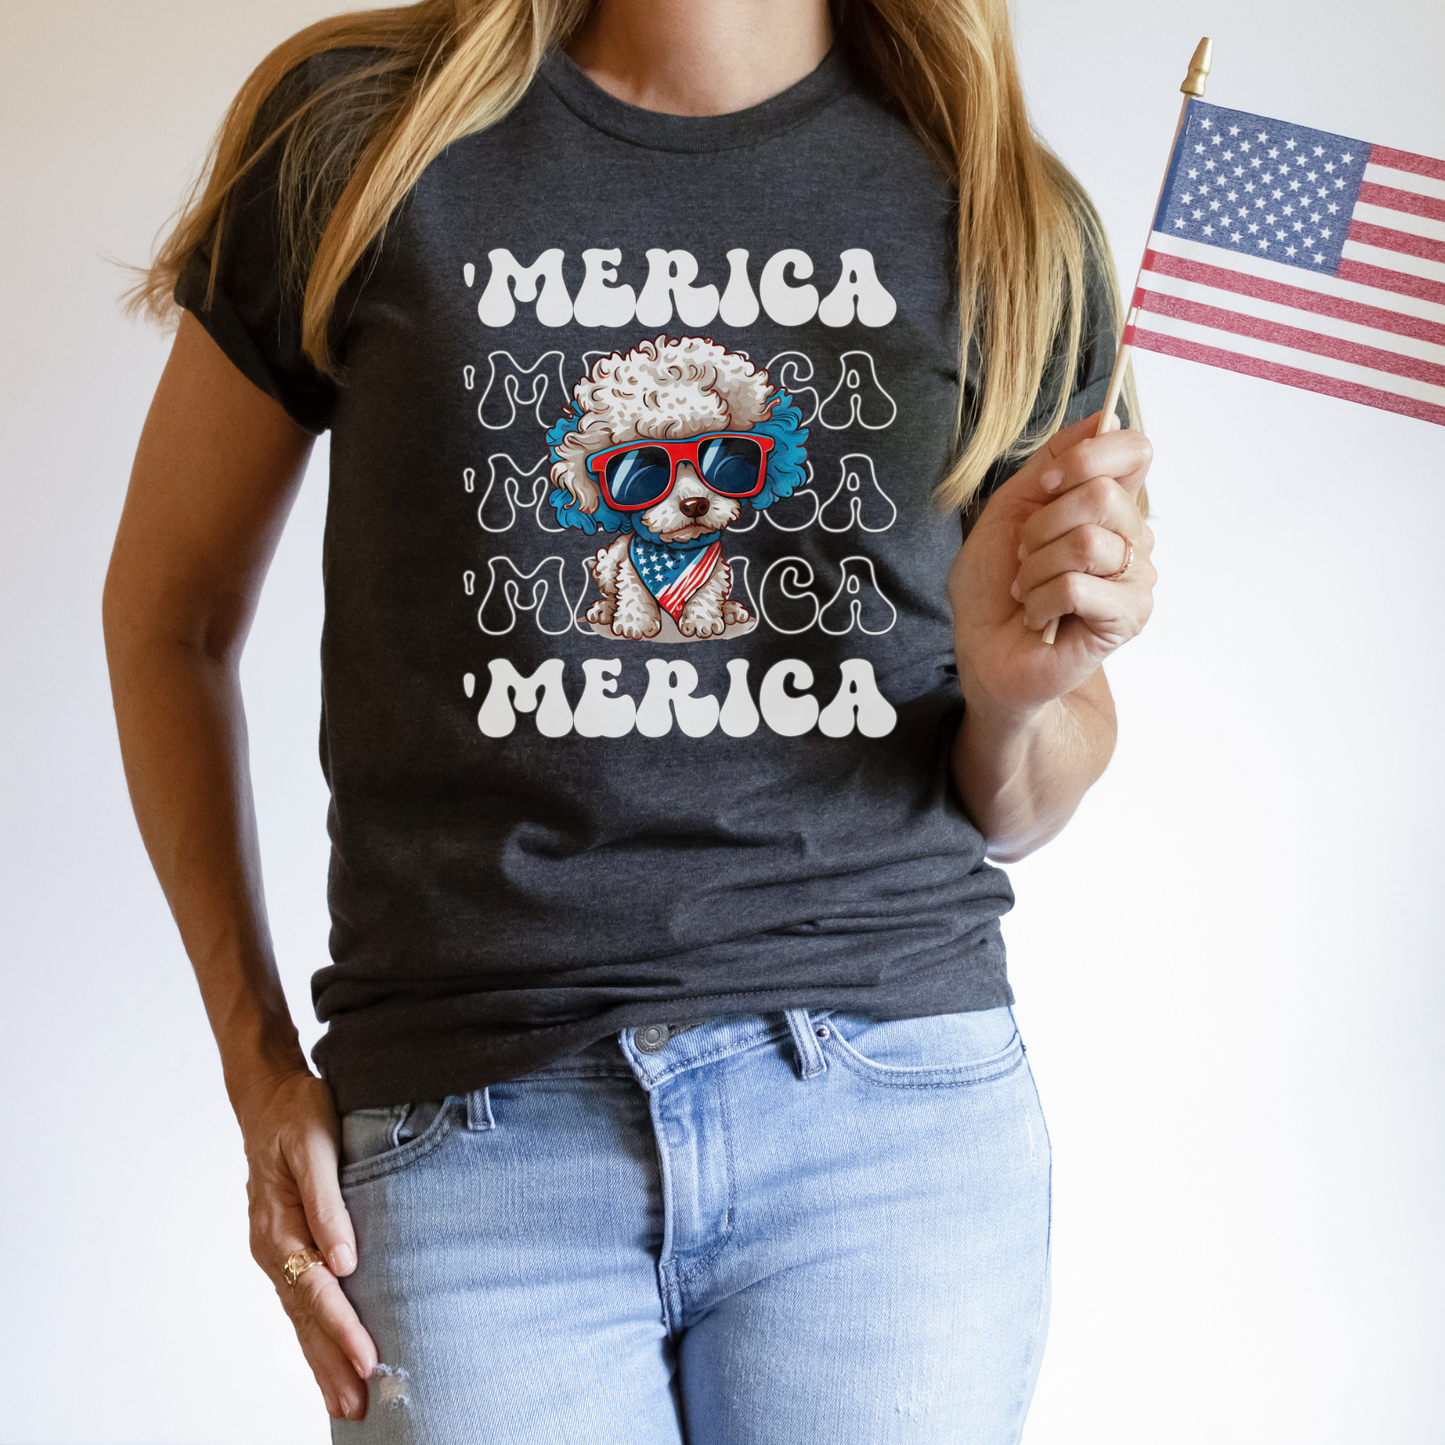 Poodle 'Merica Patriotic T-Shirt, White Poodle 4th of July Top, Miniature Poodle Dog Fourth of July Shirt Red White Blue Cute Poodle Tee